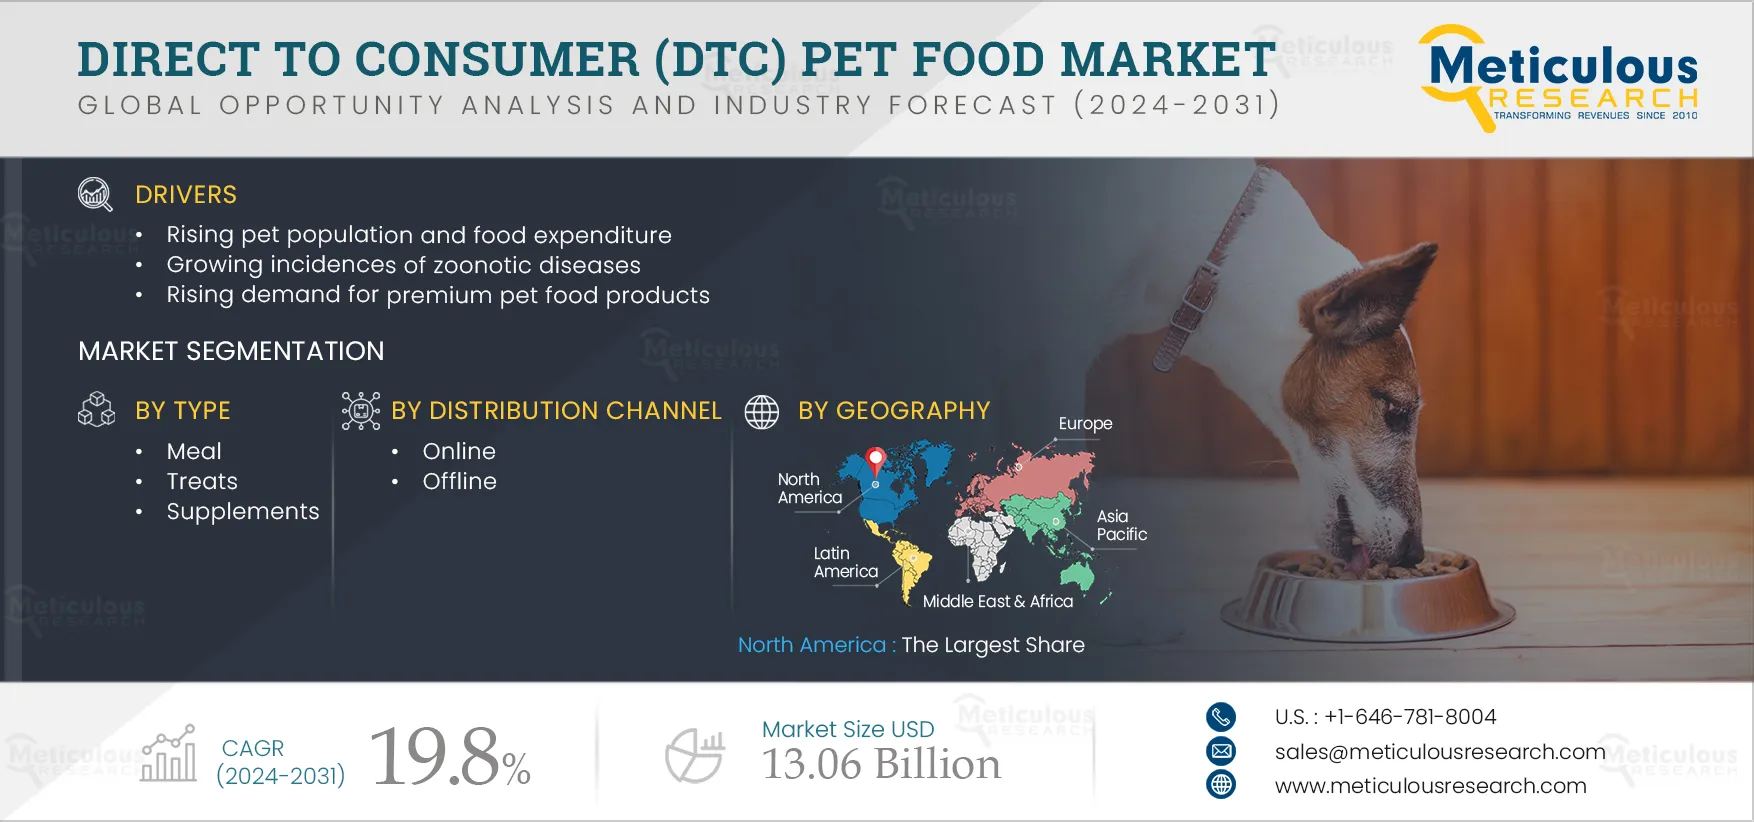 Direct-to-Consumer (DTC) Pet Food Market